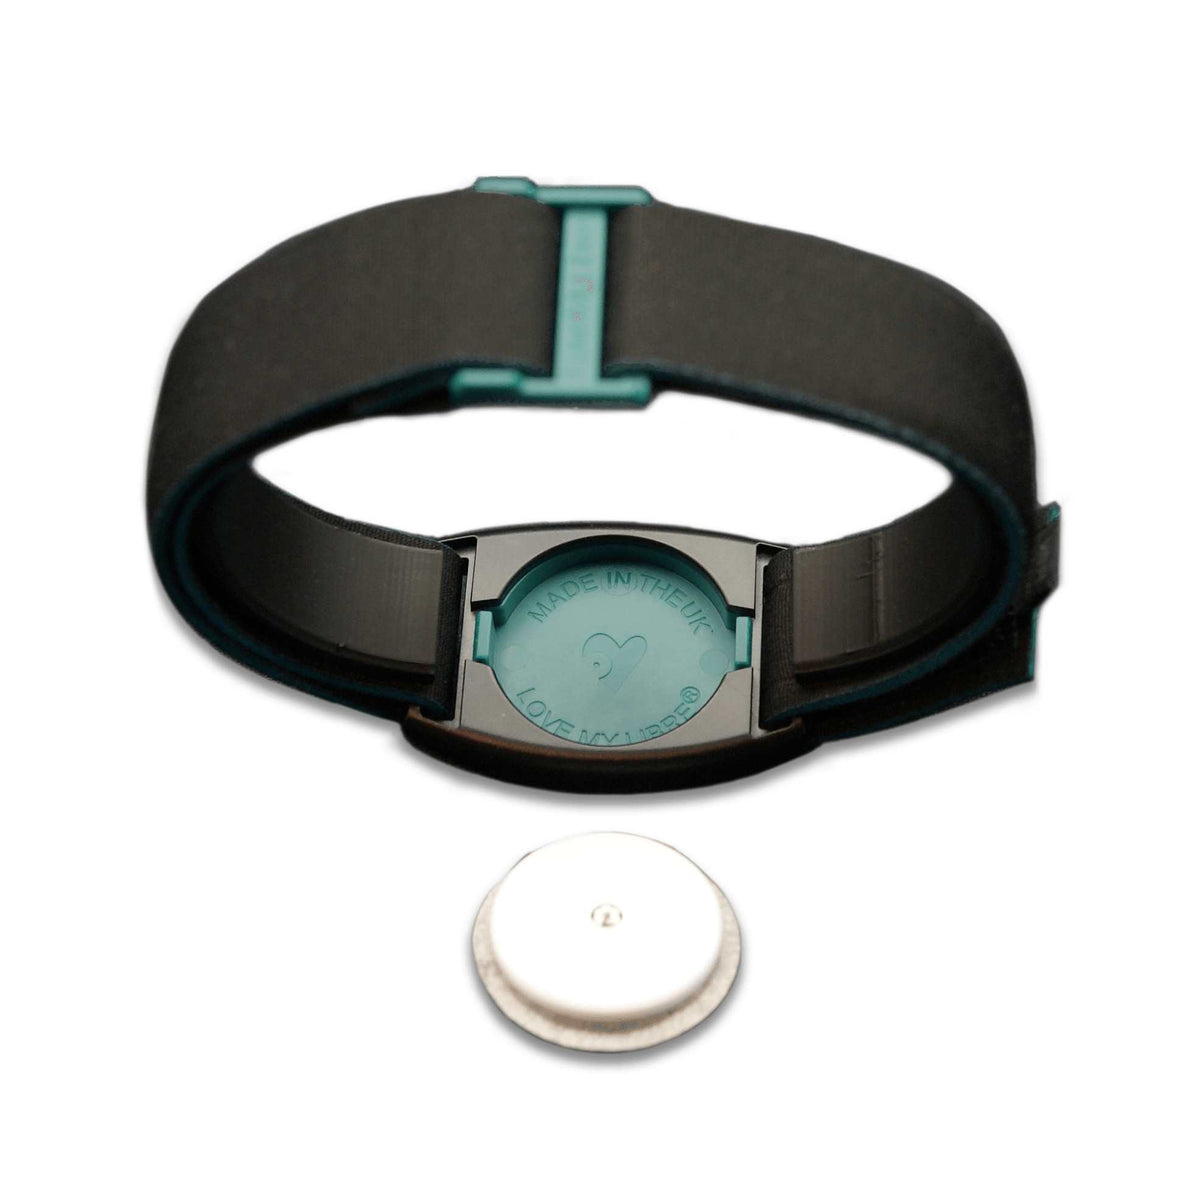 Reverse image of Libreband in teal and black. Protection for FreeStyle Libre sensor, shown on image.